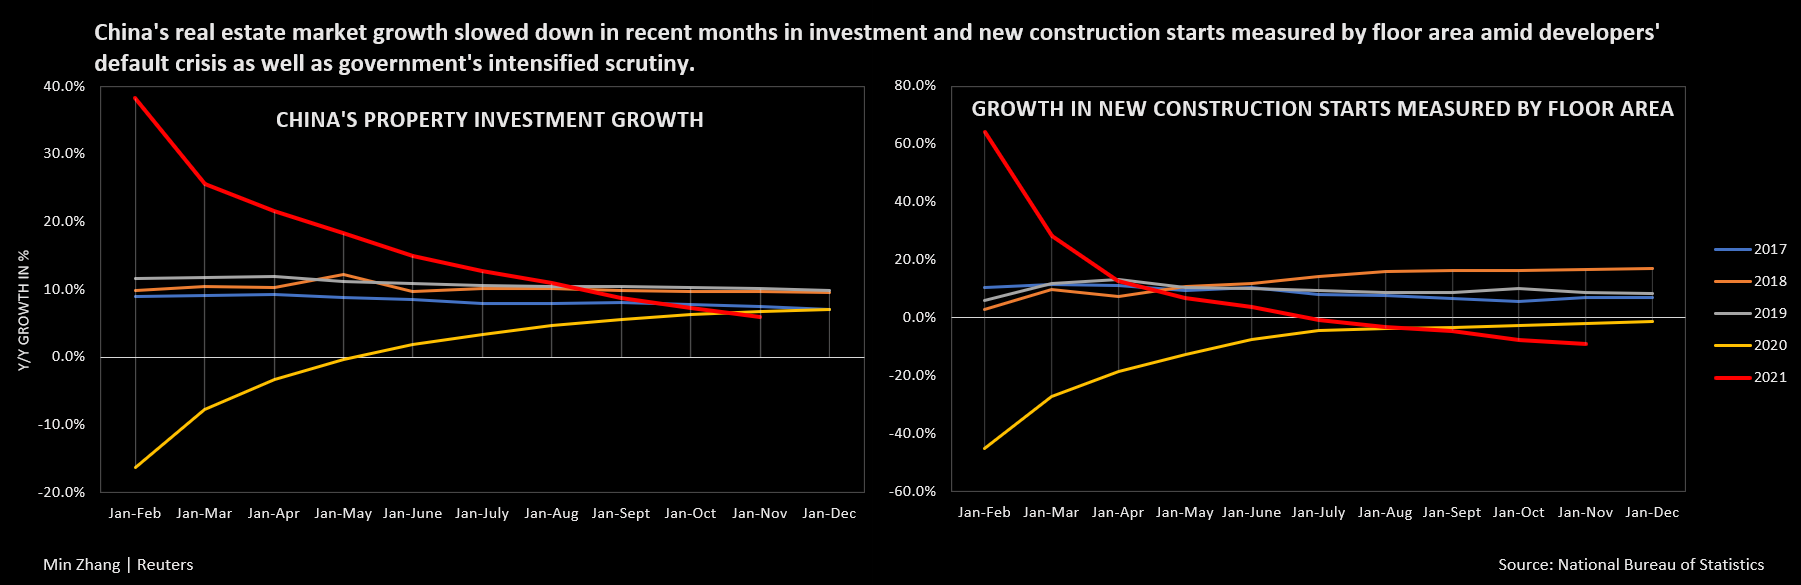 China's property investment and new construction starts